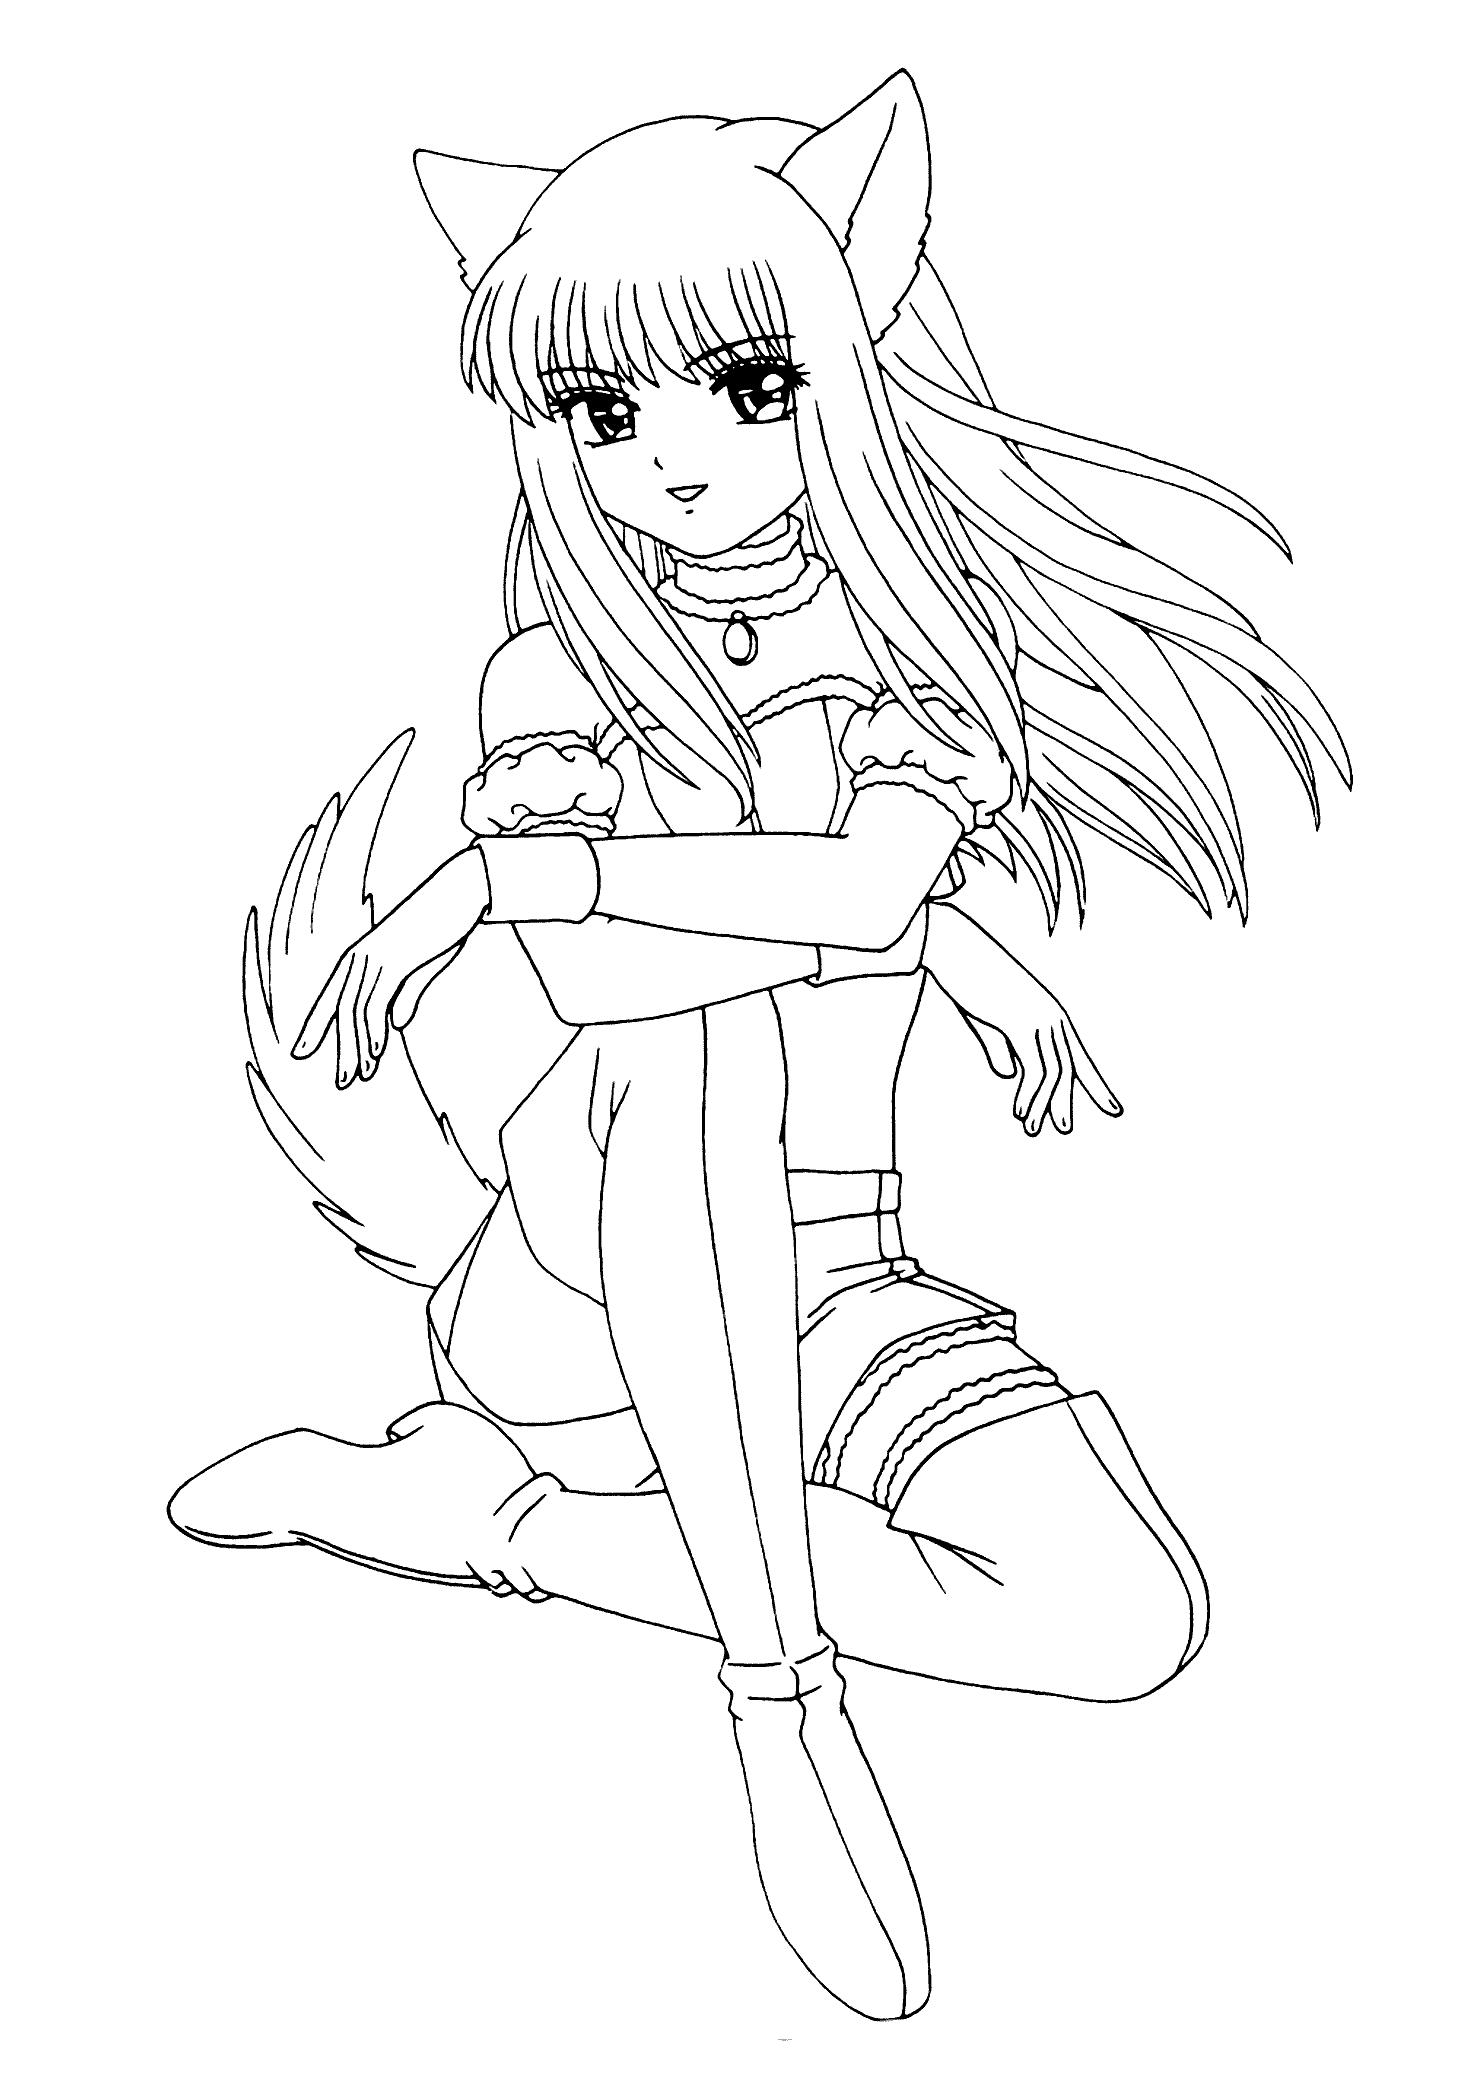 Free Coloring Pages For Girls Anime Coloring 2016 - VoteForVerde.com